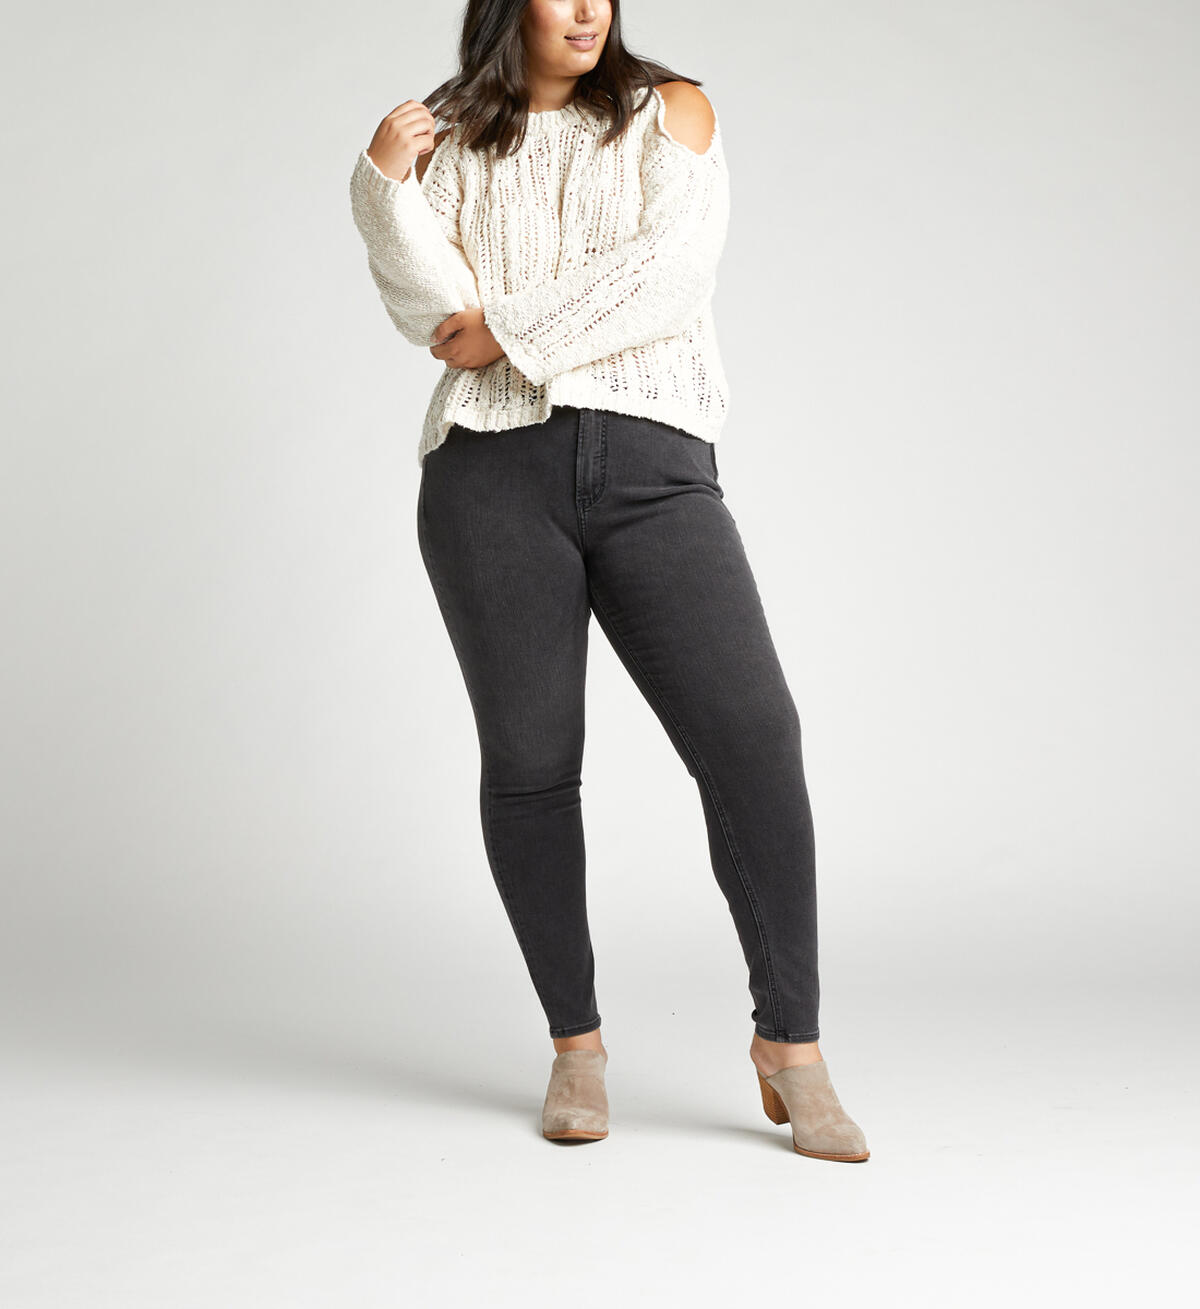 High Note High Rise Skinny Plus Size Jeans, , hi-res image number 3